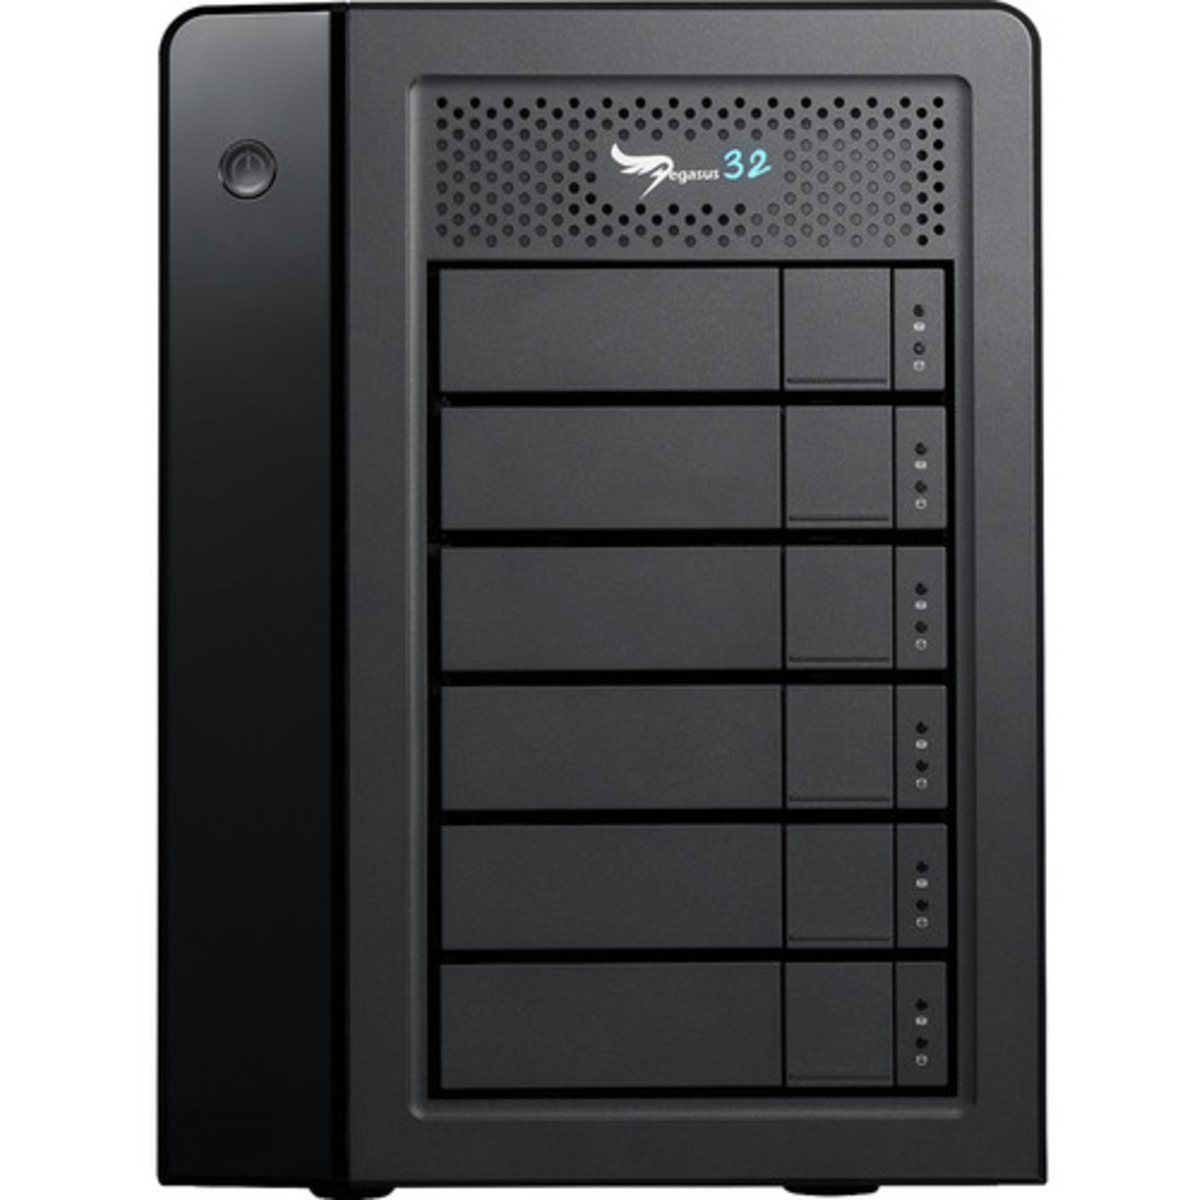 buy $3774 Promise Technology Pegasus32 R6 Thunderbolt 3 48tb Desktop DAS - Direct Attached Storage Device 6x8000gb Western Digital Ultrastar DC HC320 HUS728T8TALE6L4 3.5 7200rpm SATA 6Gb/s HDD ENTERPRISE Class Drives Installed - Burn-In Tested - nas headquarters buy network attached storage server device das new raid-5 free shipping usa christmas new year holiday sale Pegasus32 R6 Thunderbolt 3